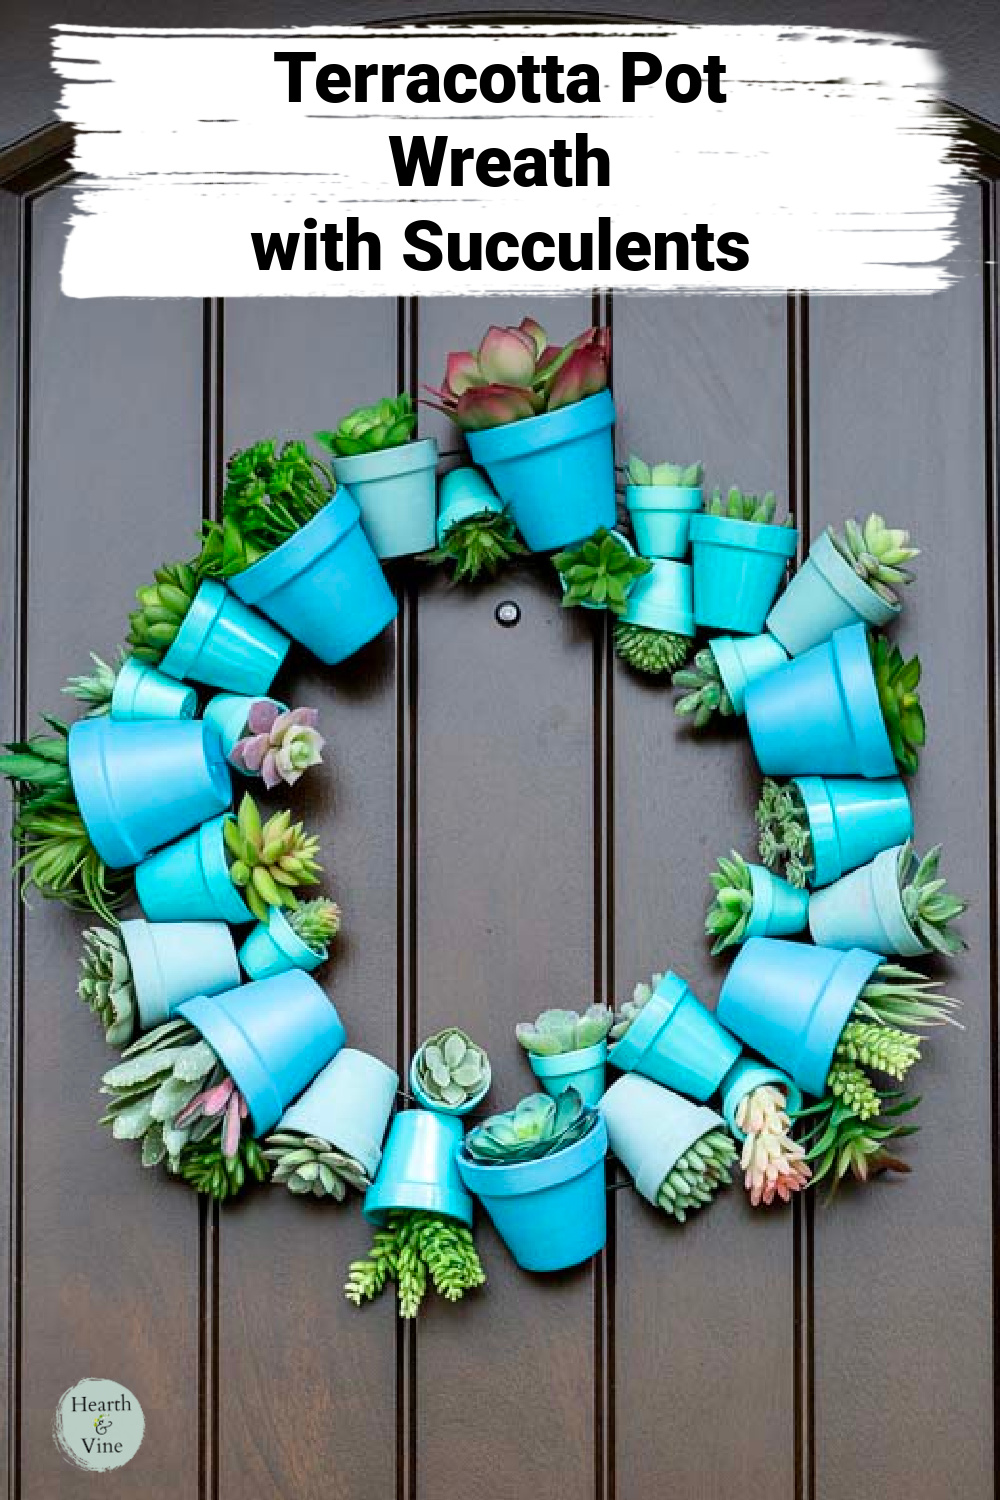 Clay pot wreath in shades of blue with faux succulents inside hanging on a door.